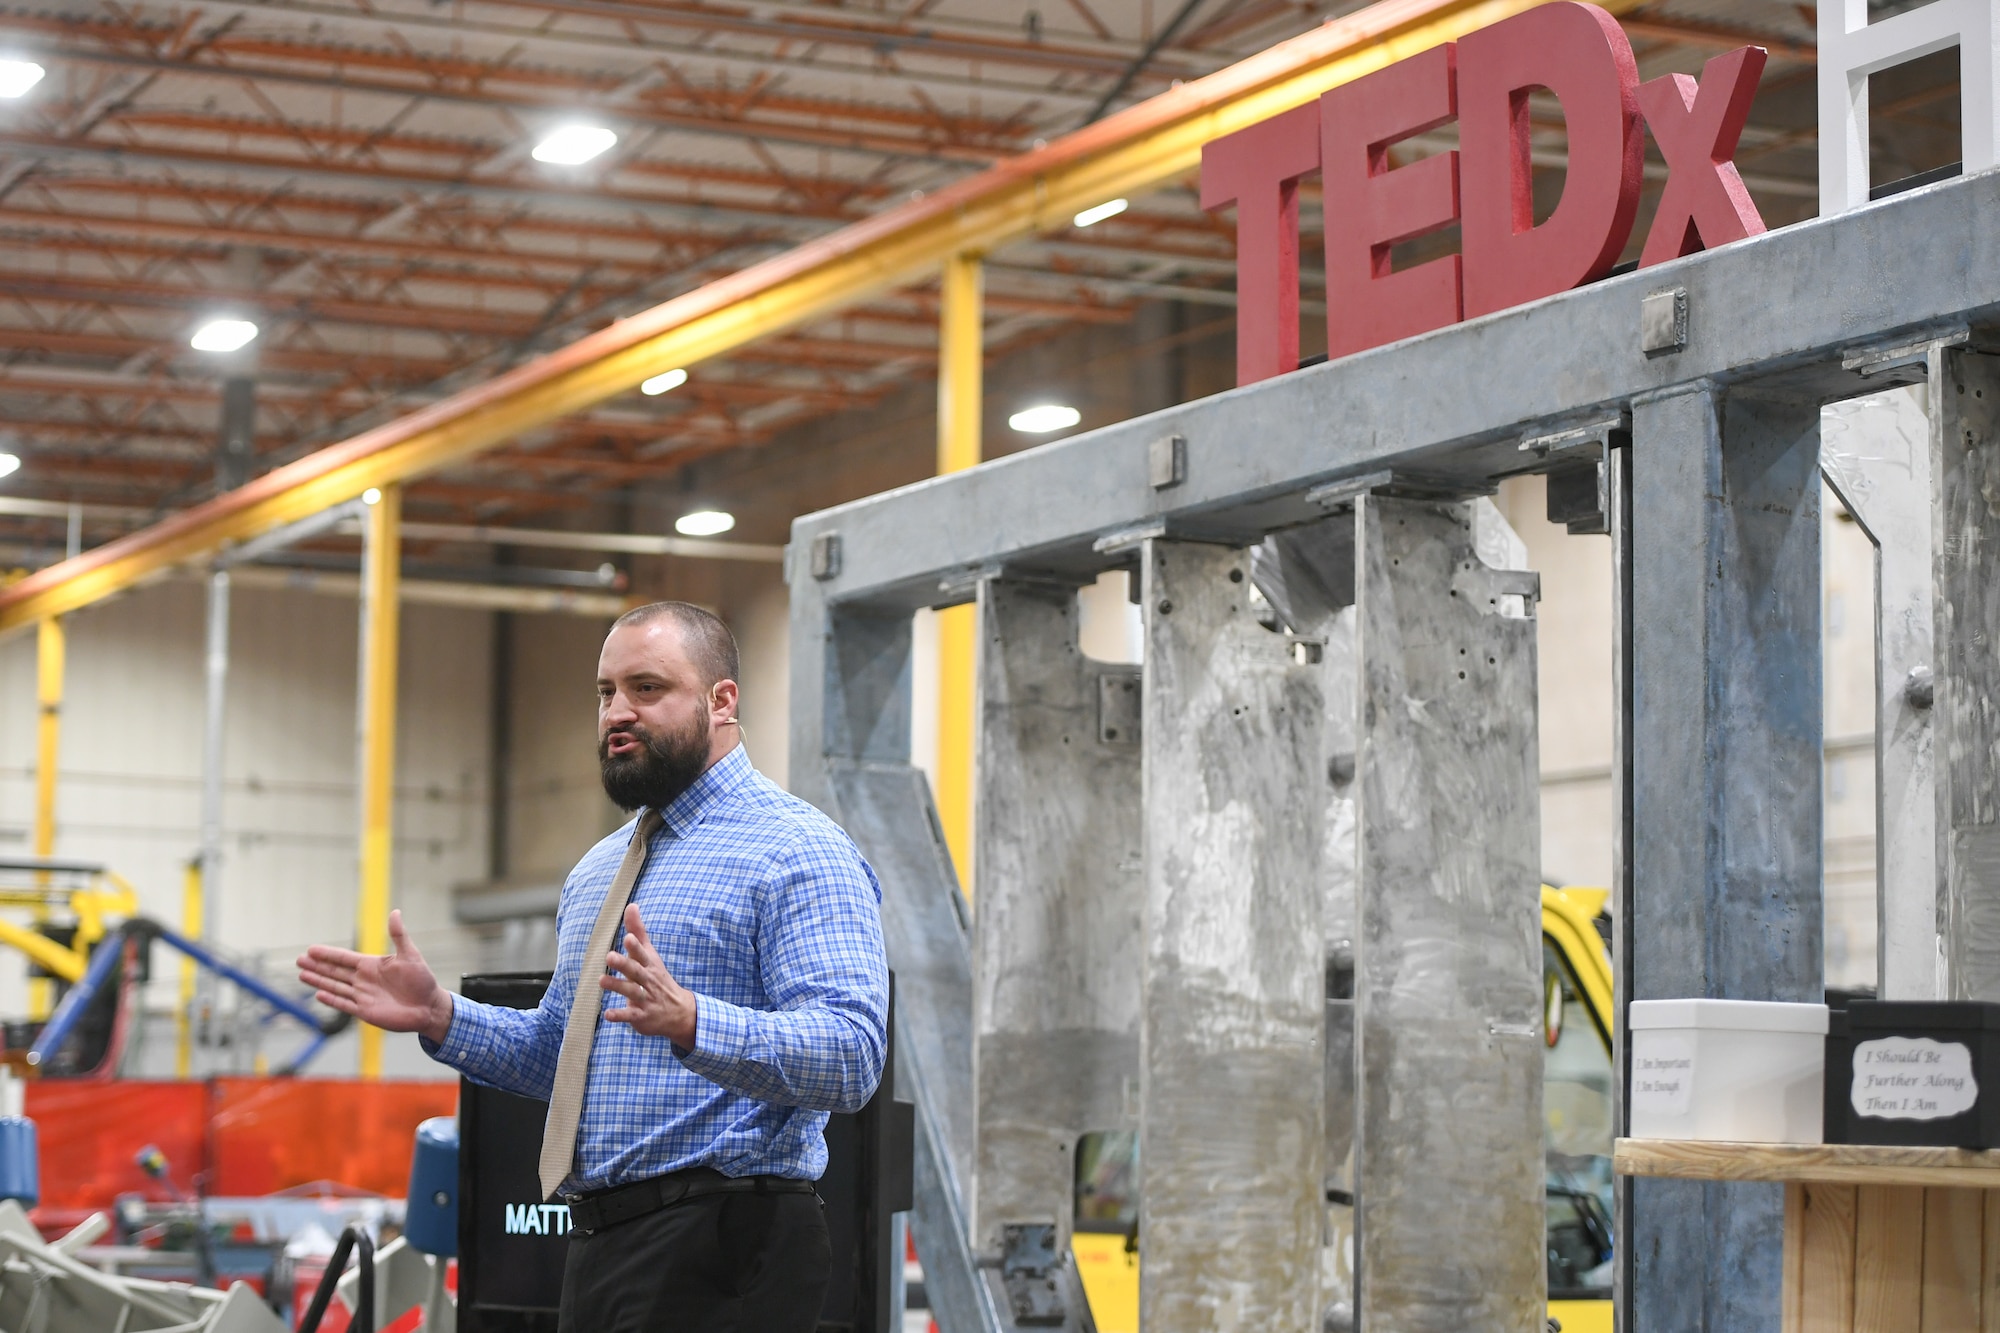 Matt Posey, security chief for Ground Based Strategic Deterrent, speaks at the TEDx salon event held at Hill Air Force Base, Utah, Oct. 17, 2019. Posey's talk urged civil servants to strive for excellence and to give more than expected. (U.S. Air Force photo by Cynthia Griggs)